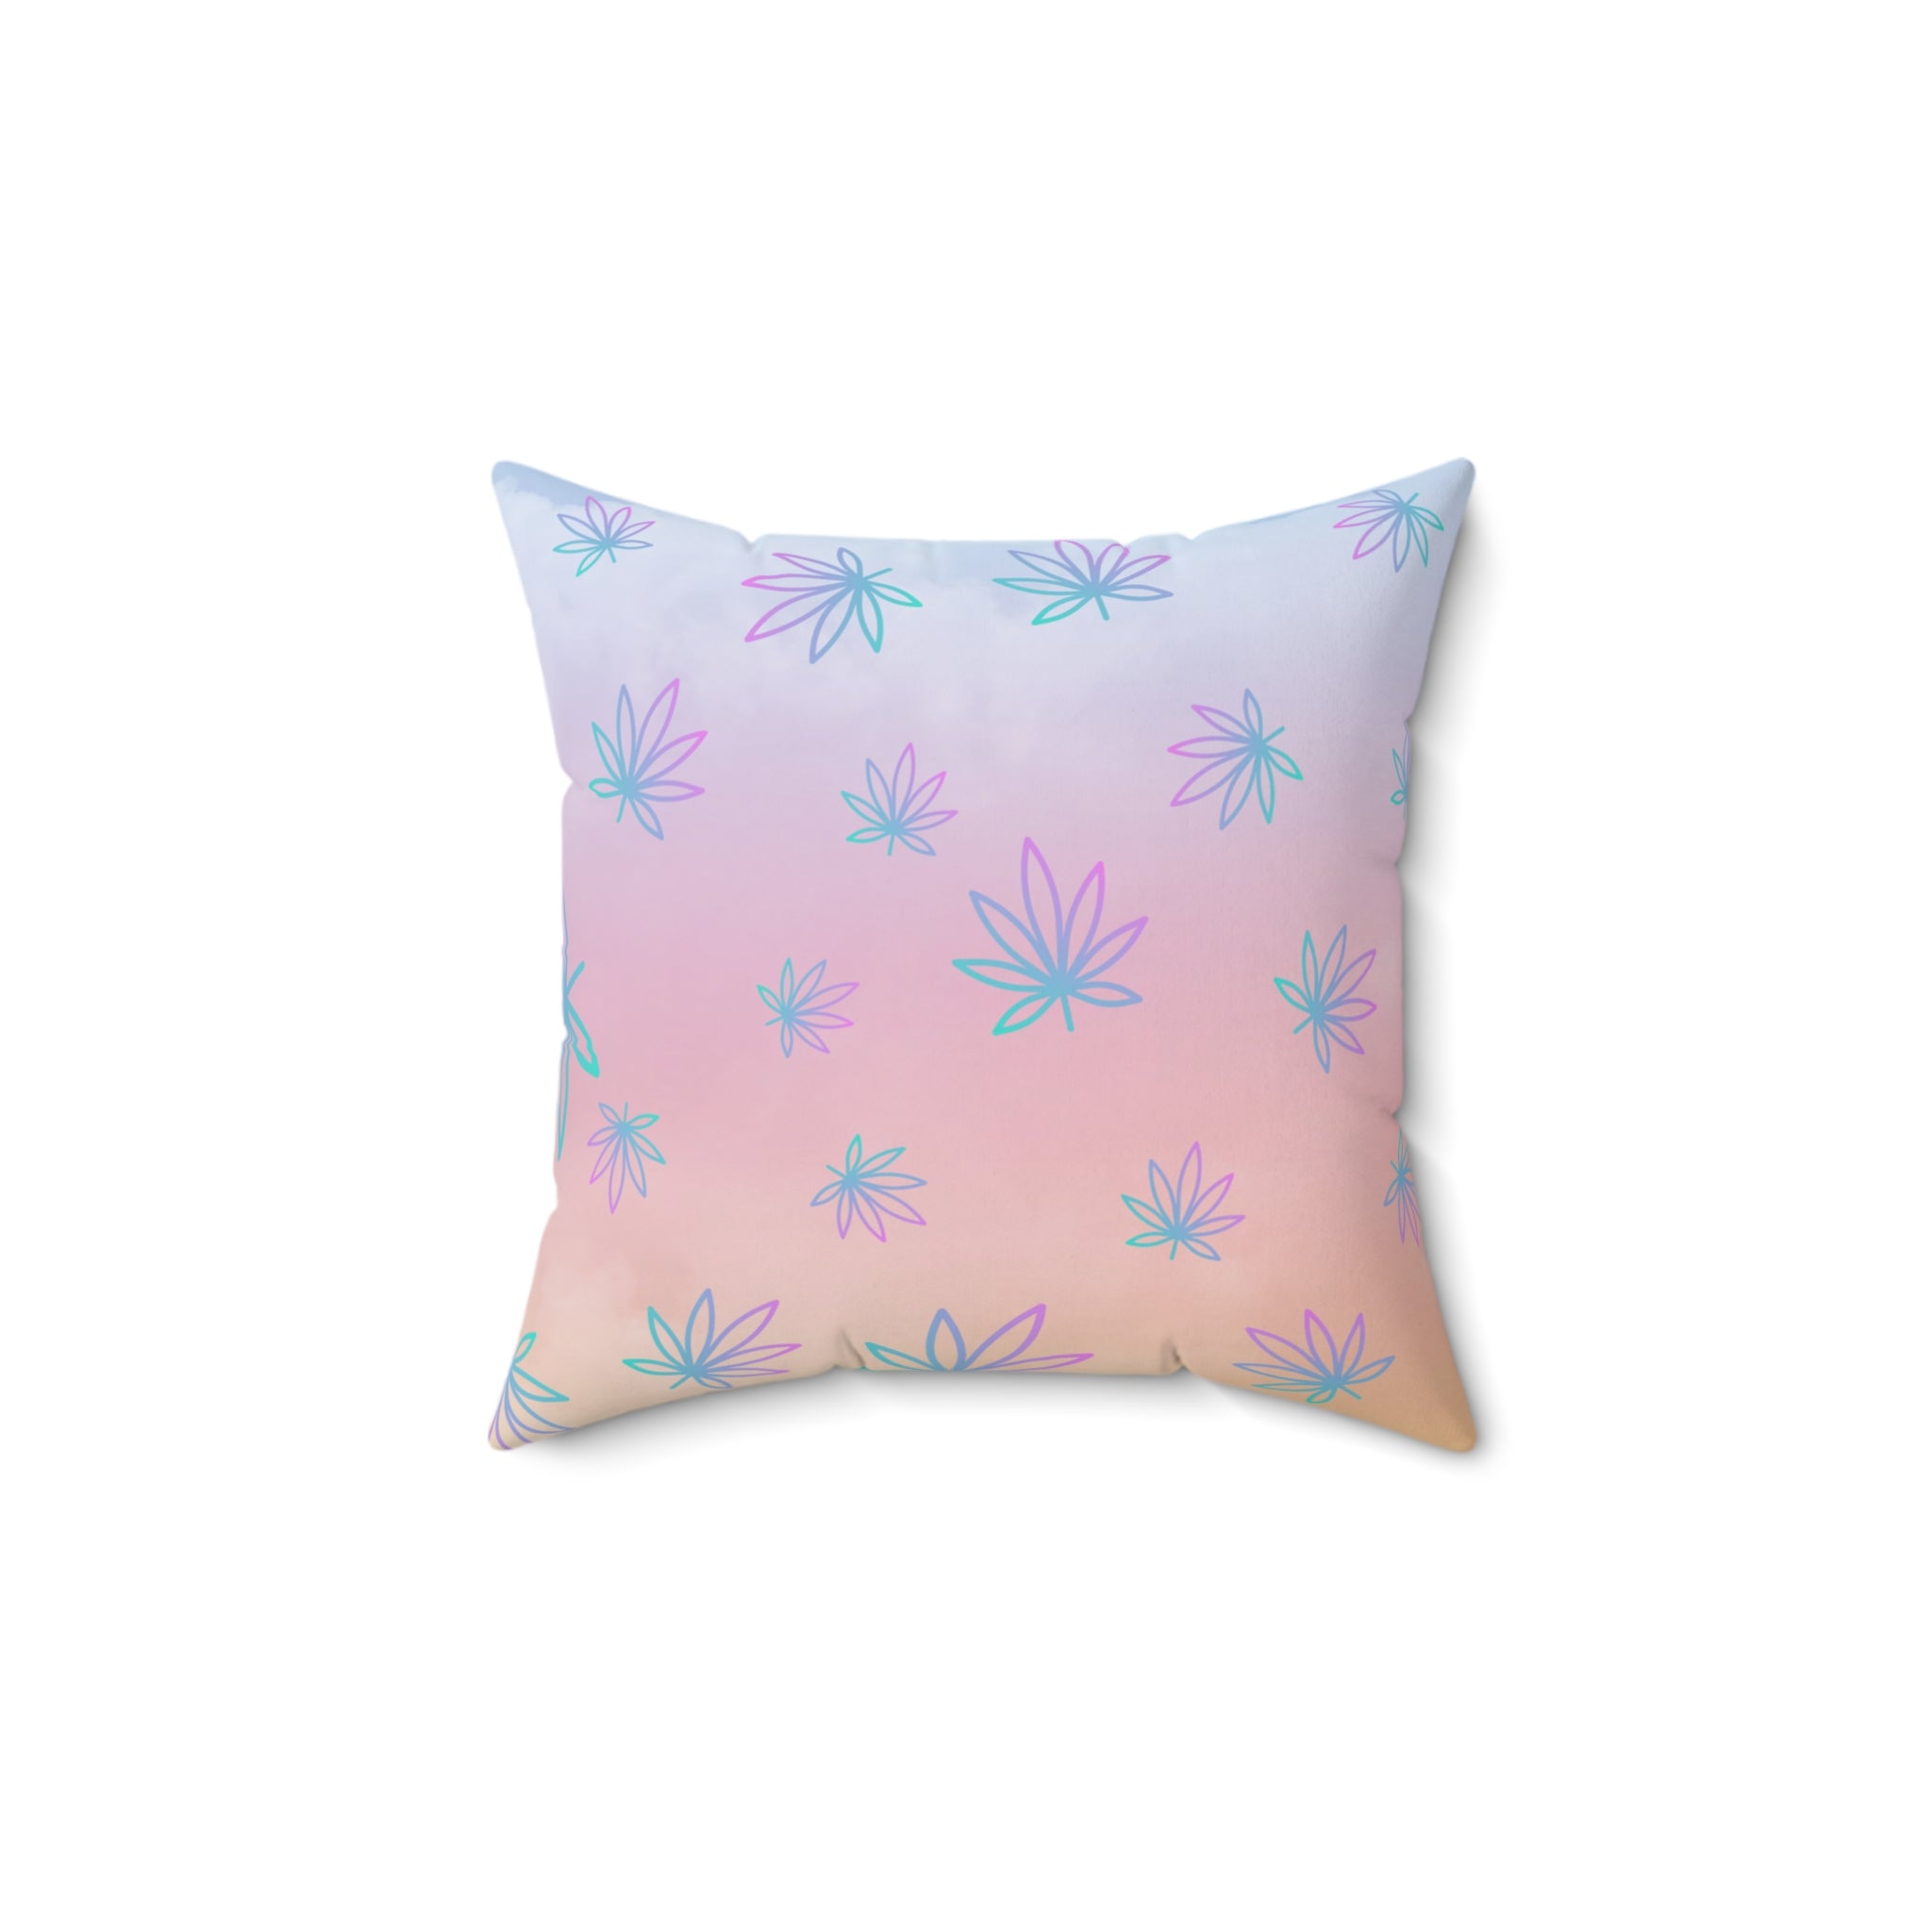 Your Royal Highness Square Pillow Stoner Gift